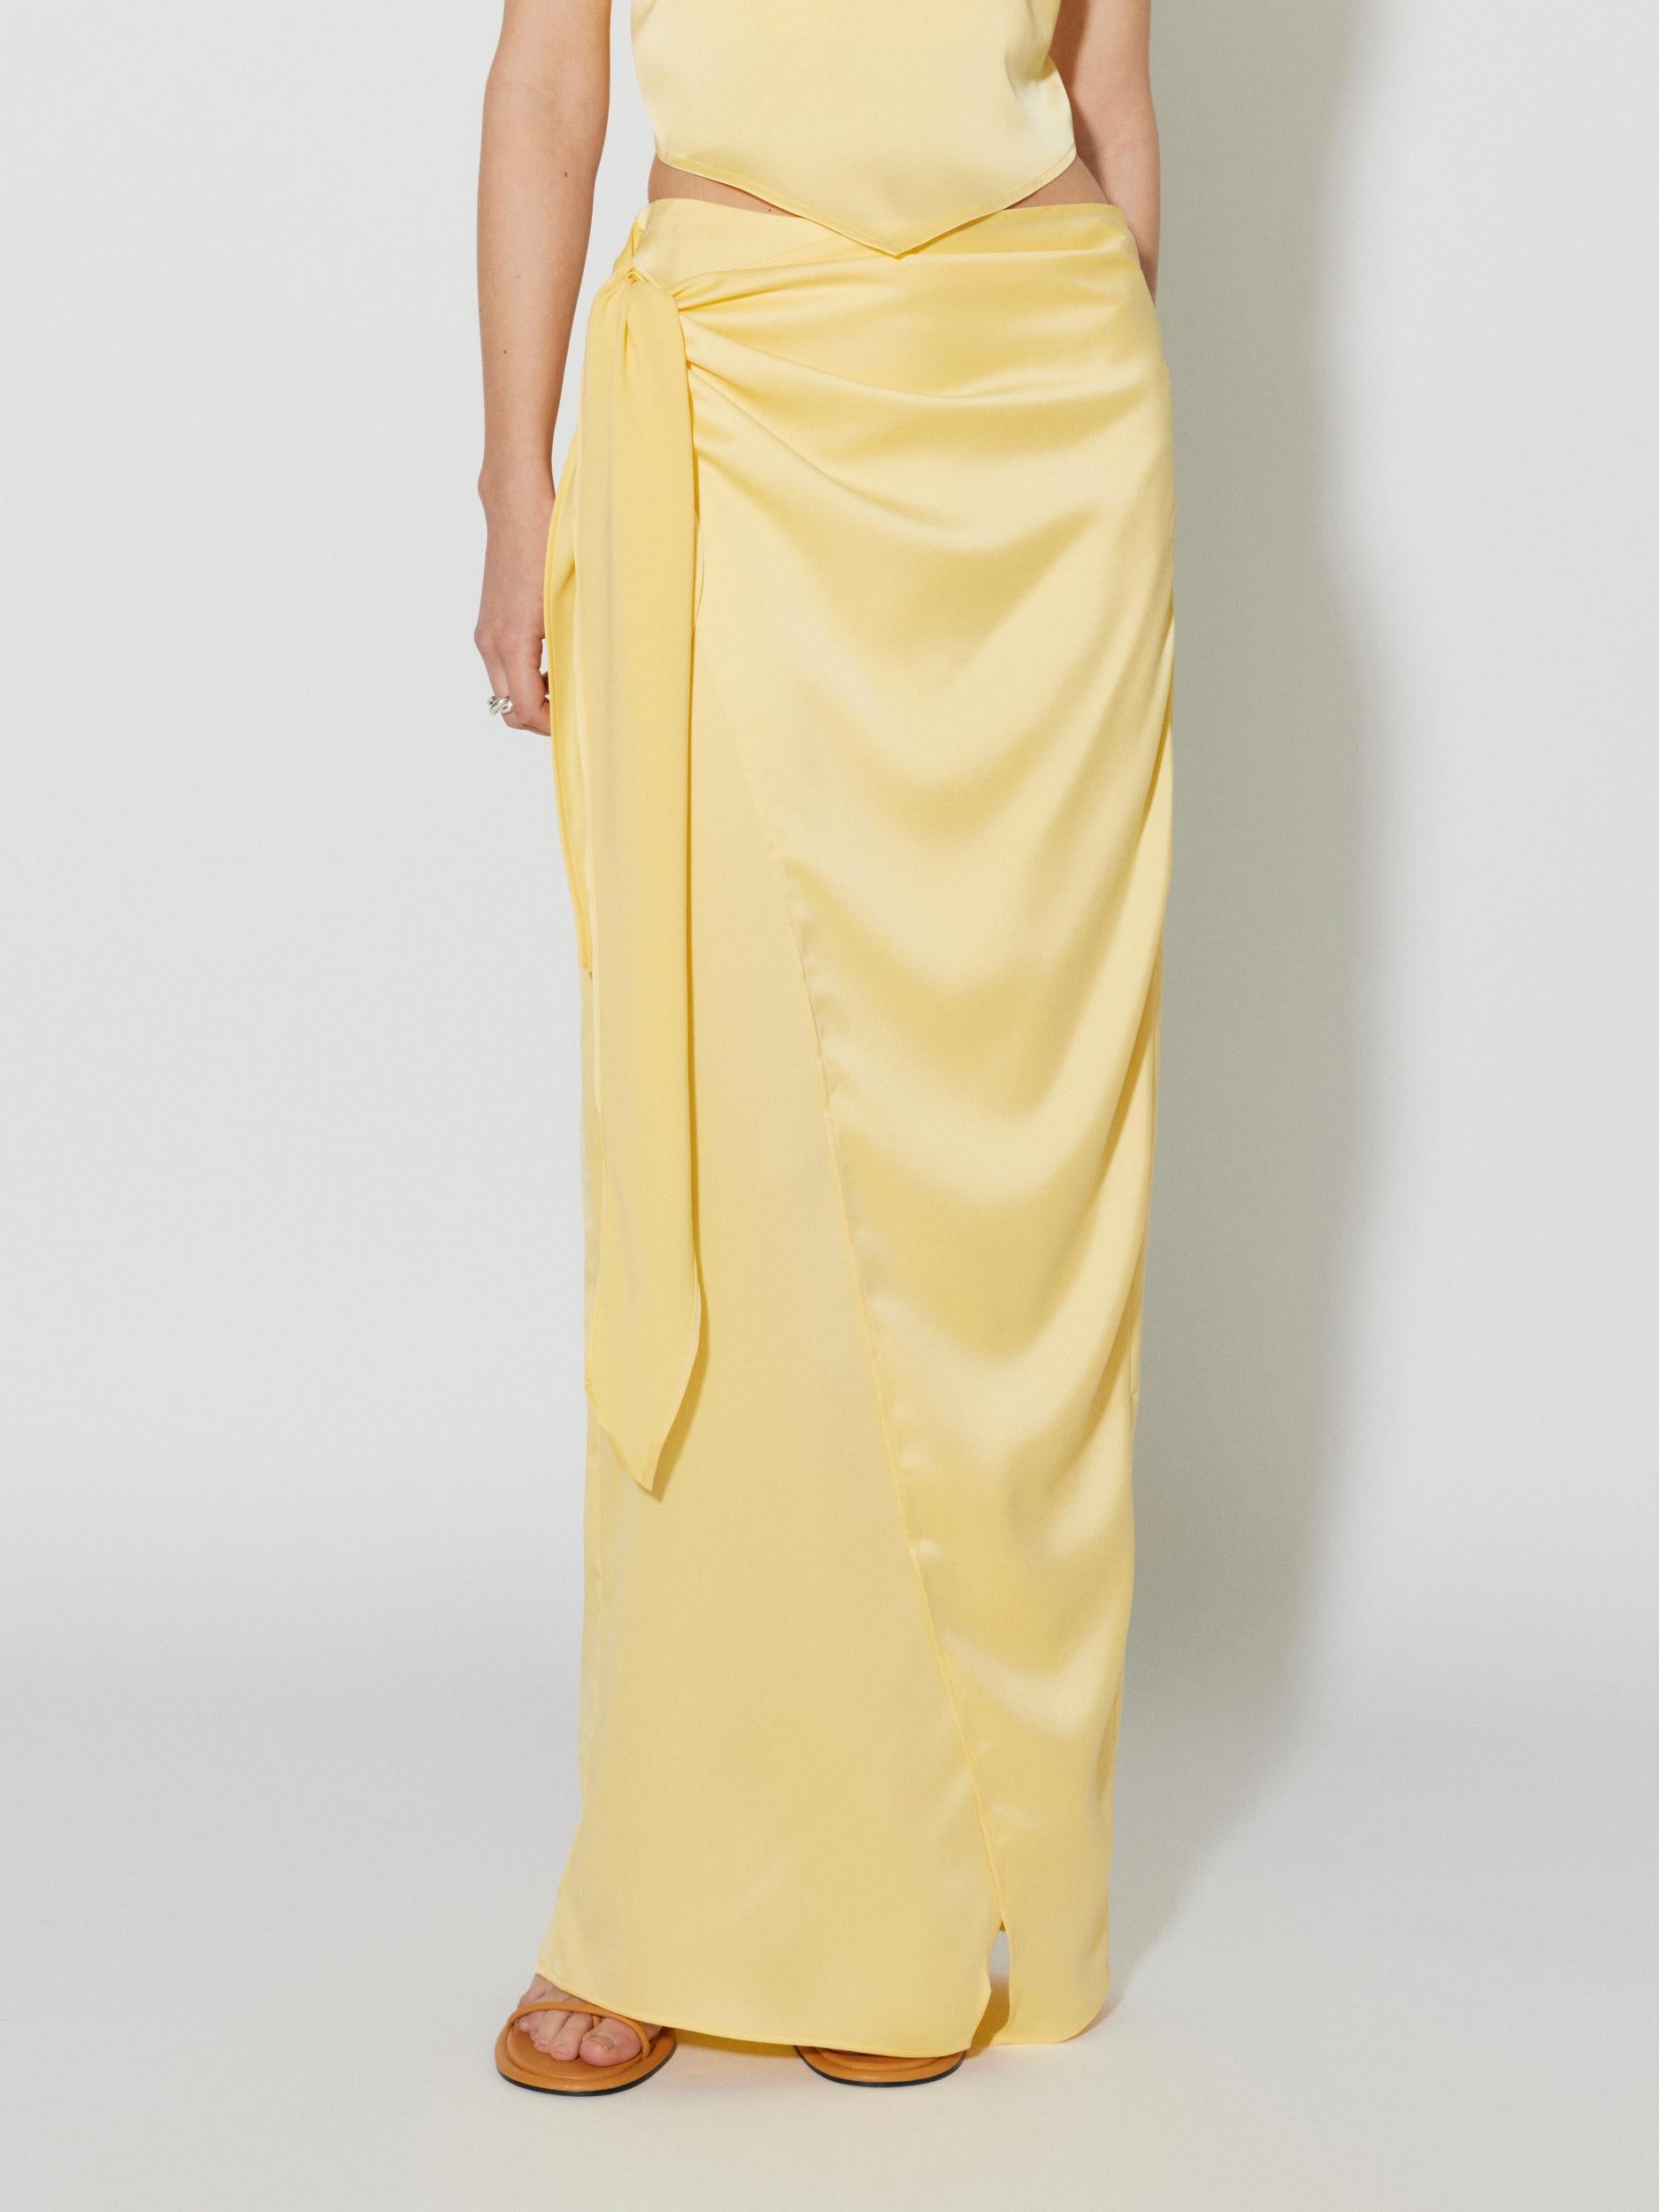 Something new yellow skirt with knot